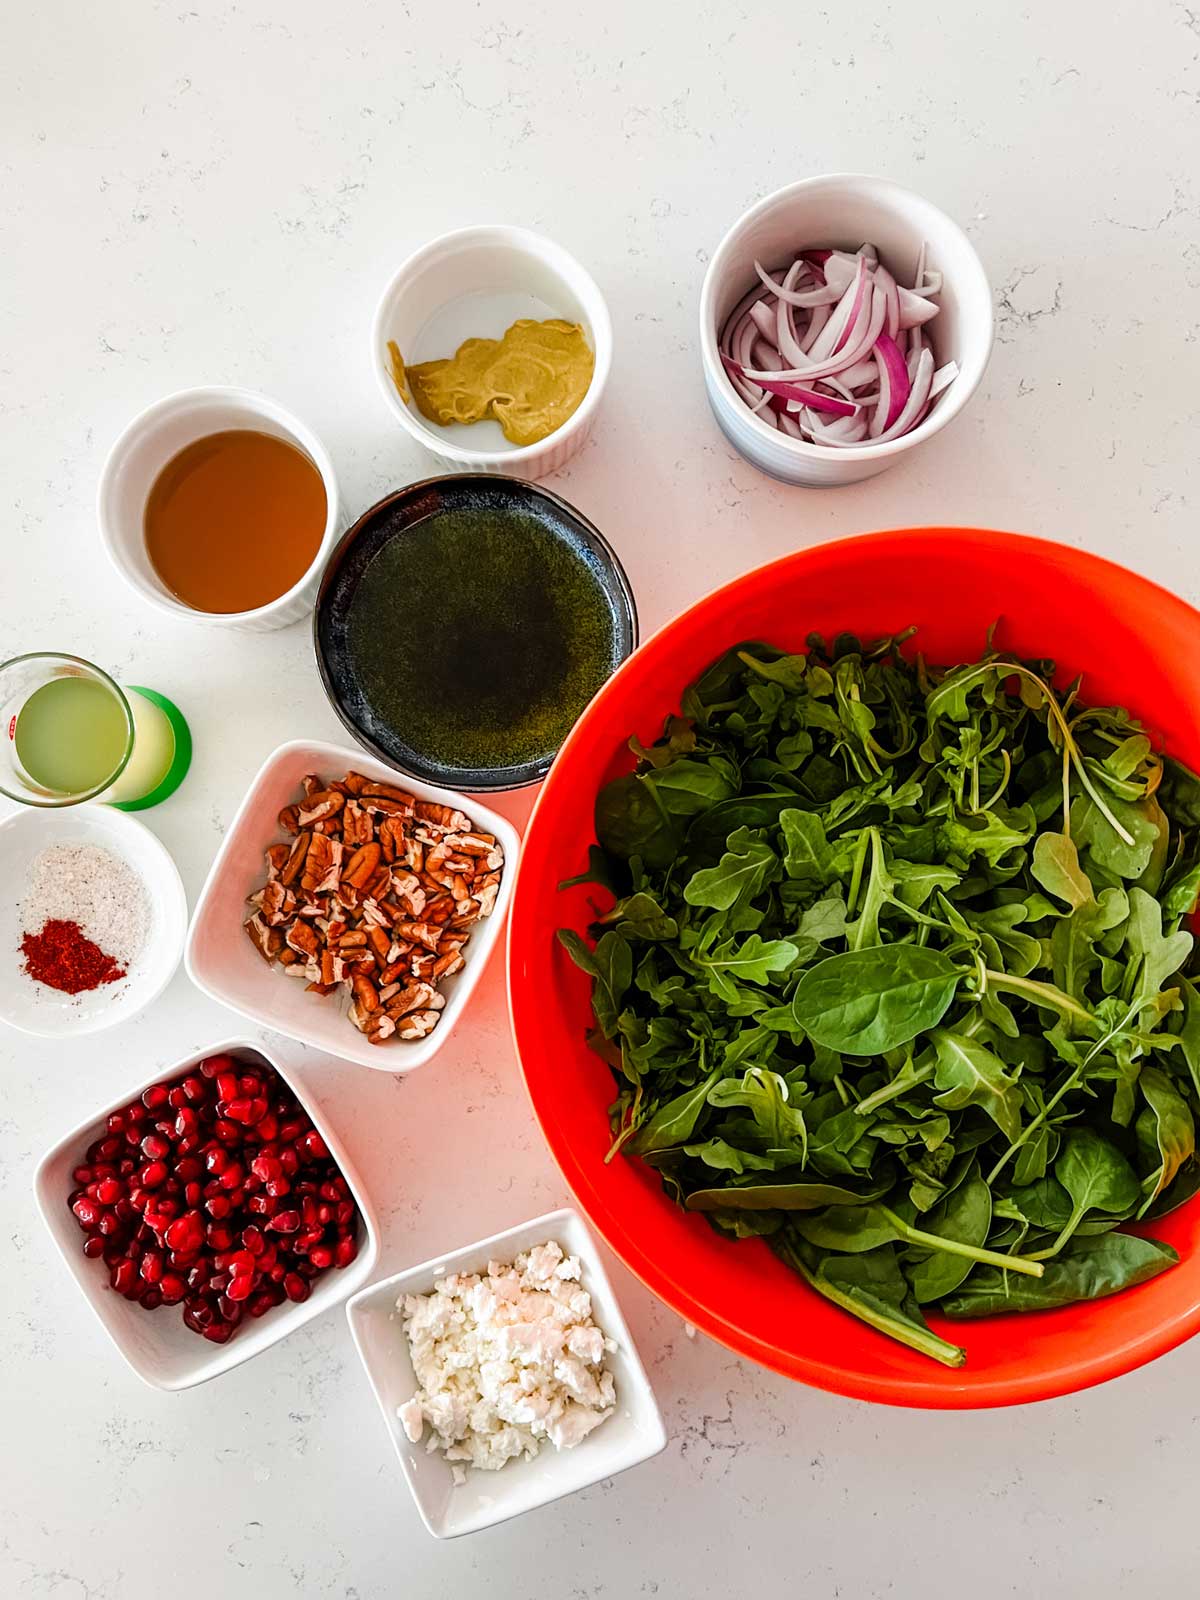 Overhead photo of spinach, arugula, red onion, goat cheese, pomegranat and dressing ingredients for a salad.